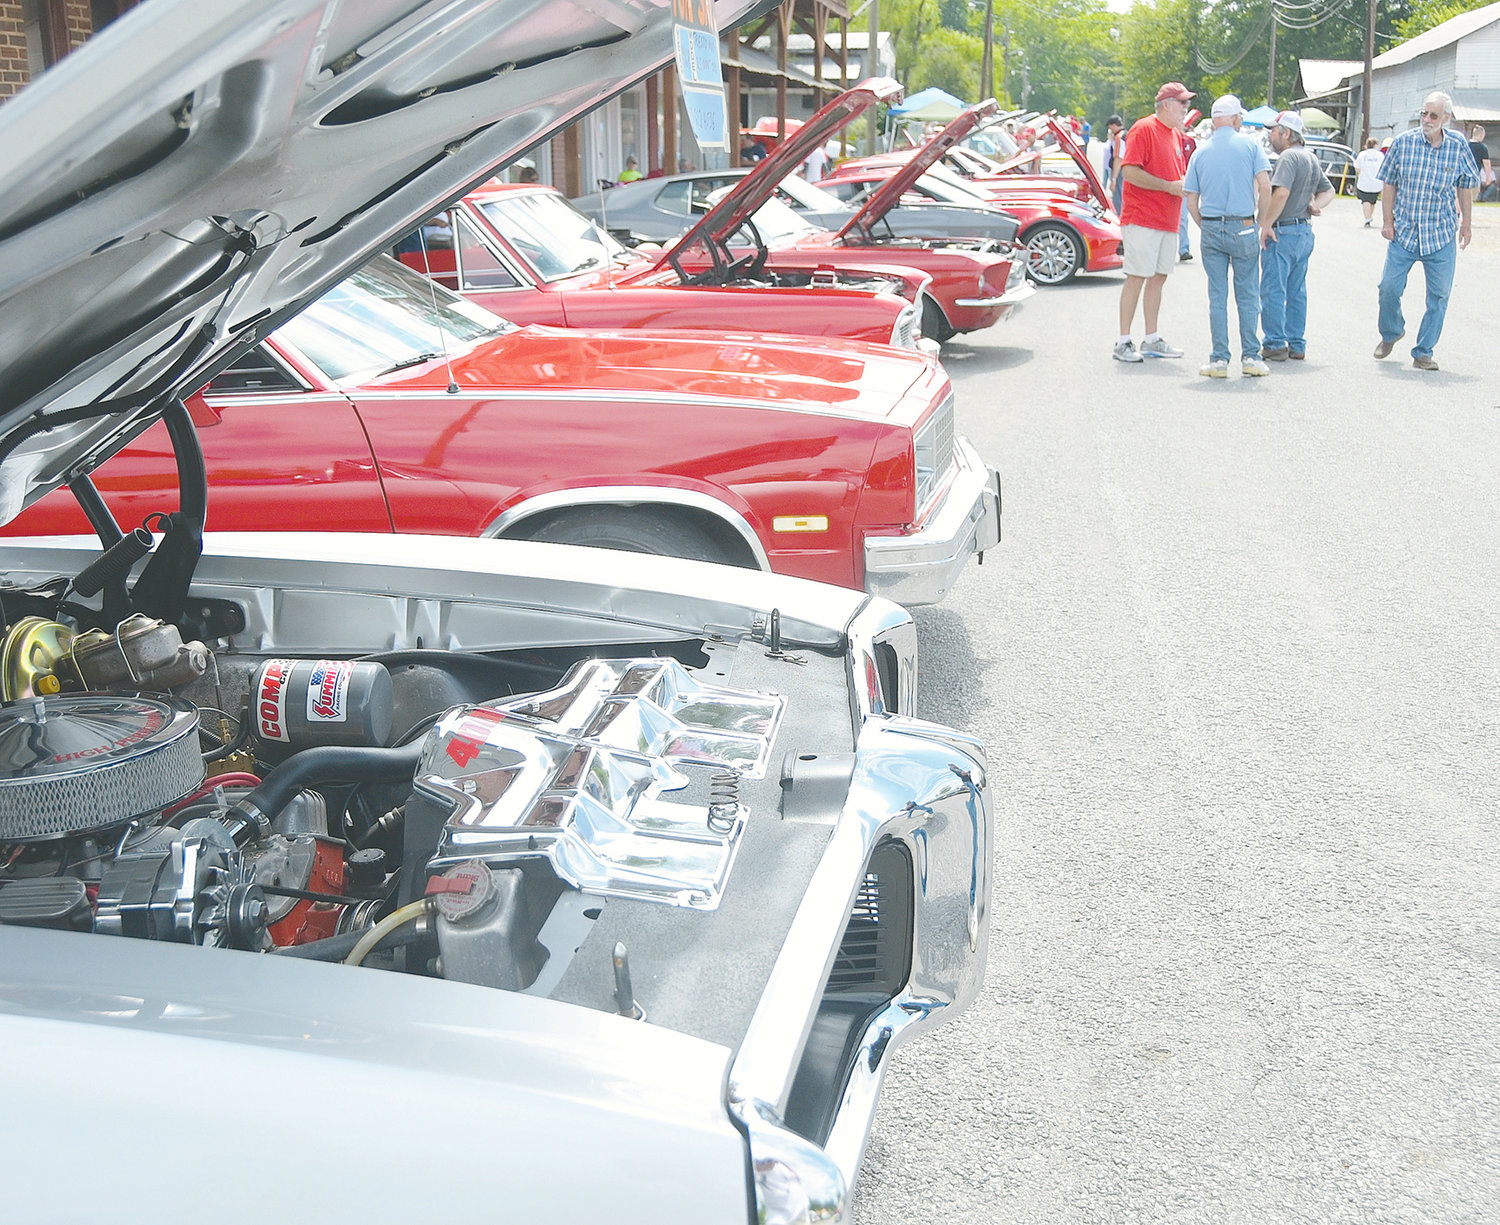 Popular Nauvoo Car Show on tap today Daily Mountain Eagle